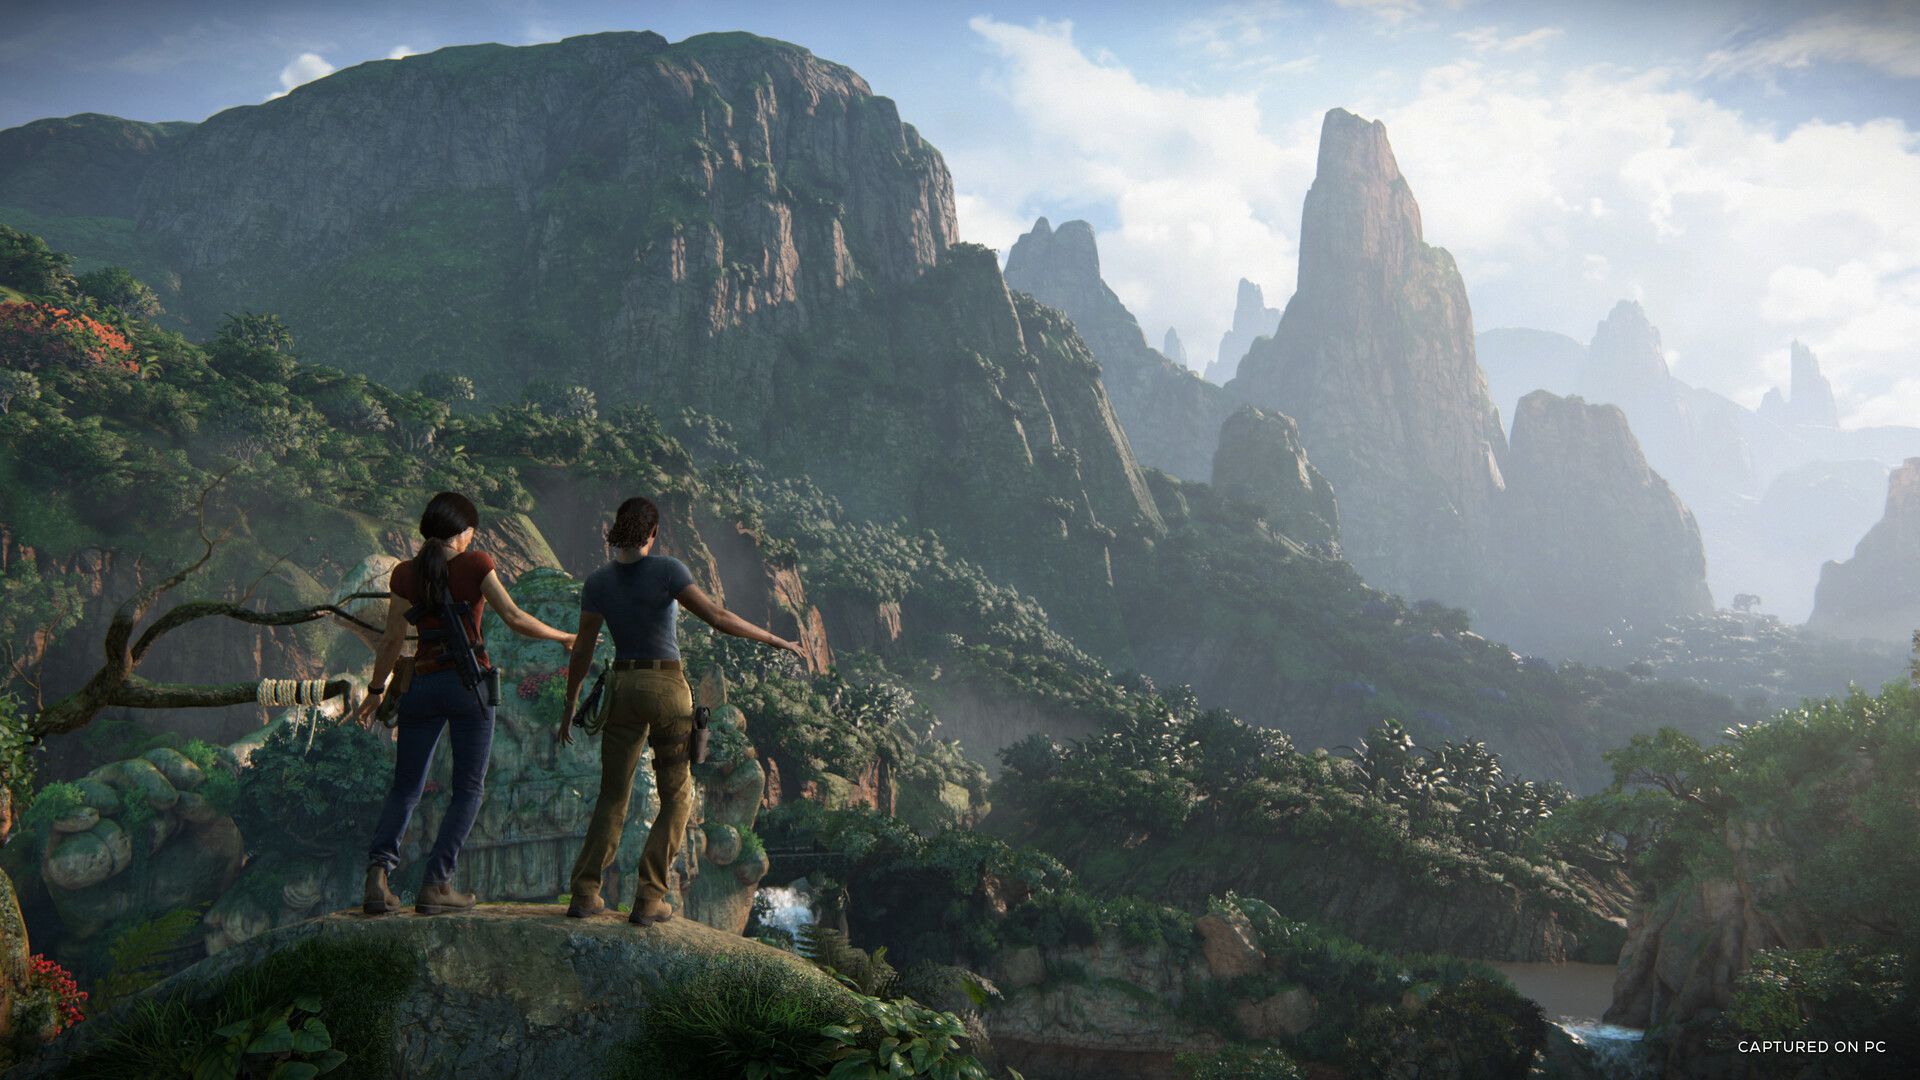 Uncharted Legacy of Thieves Collection release date, time and PC